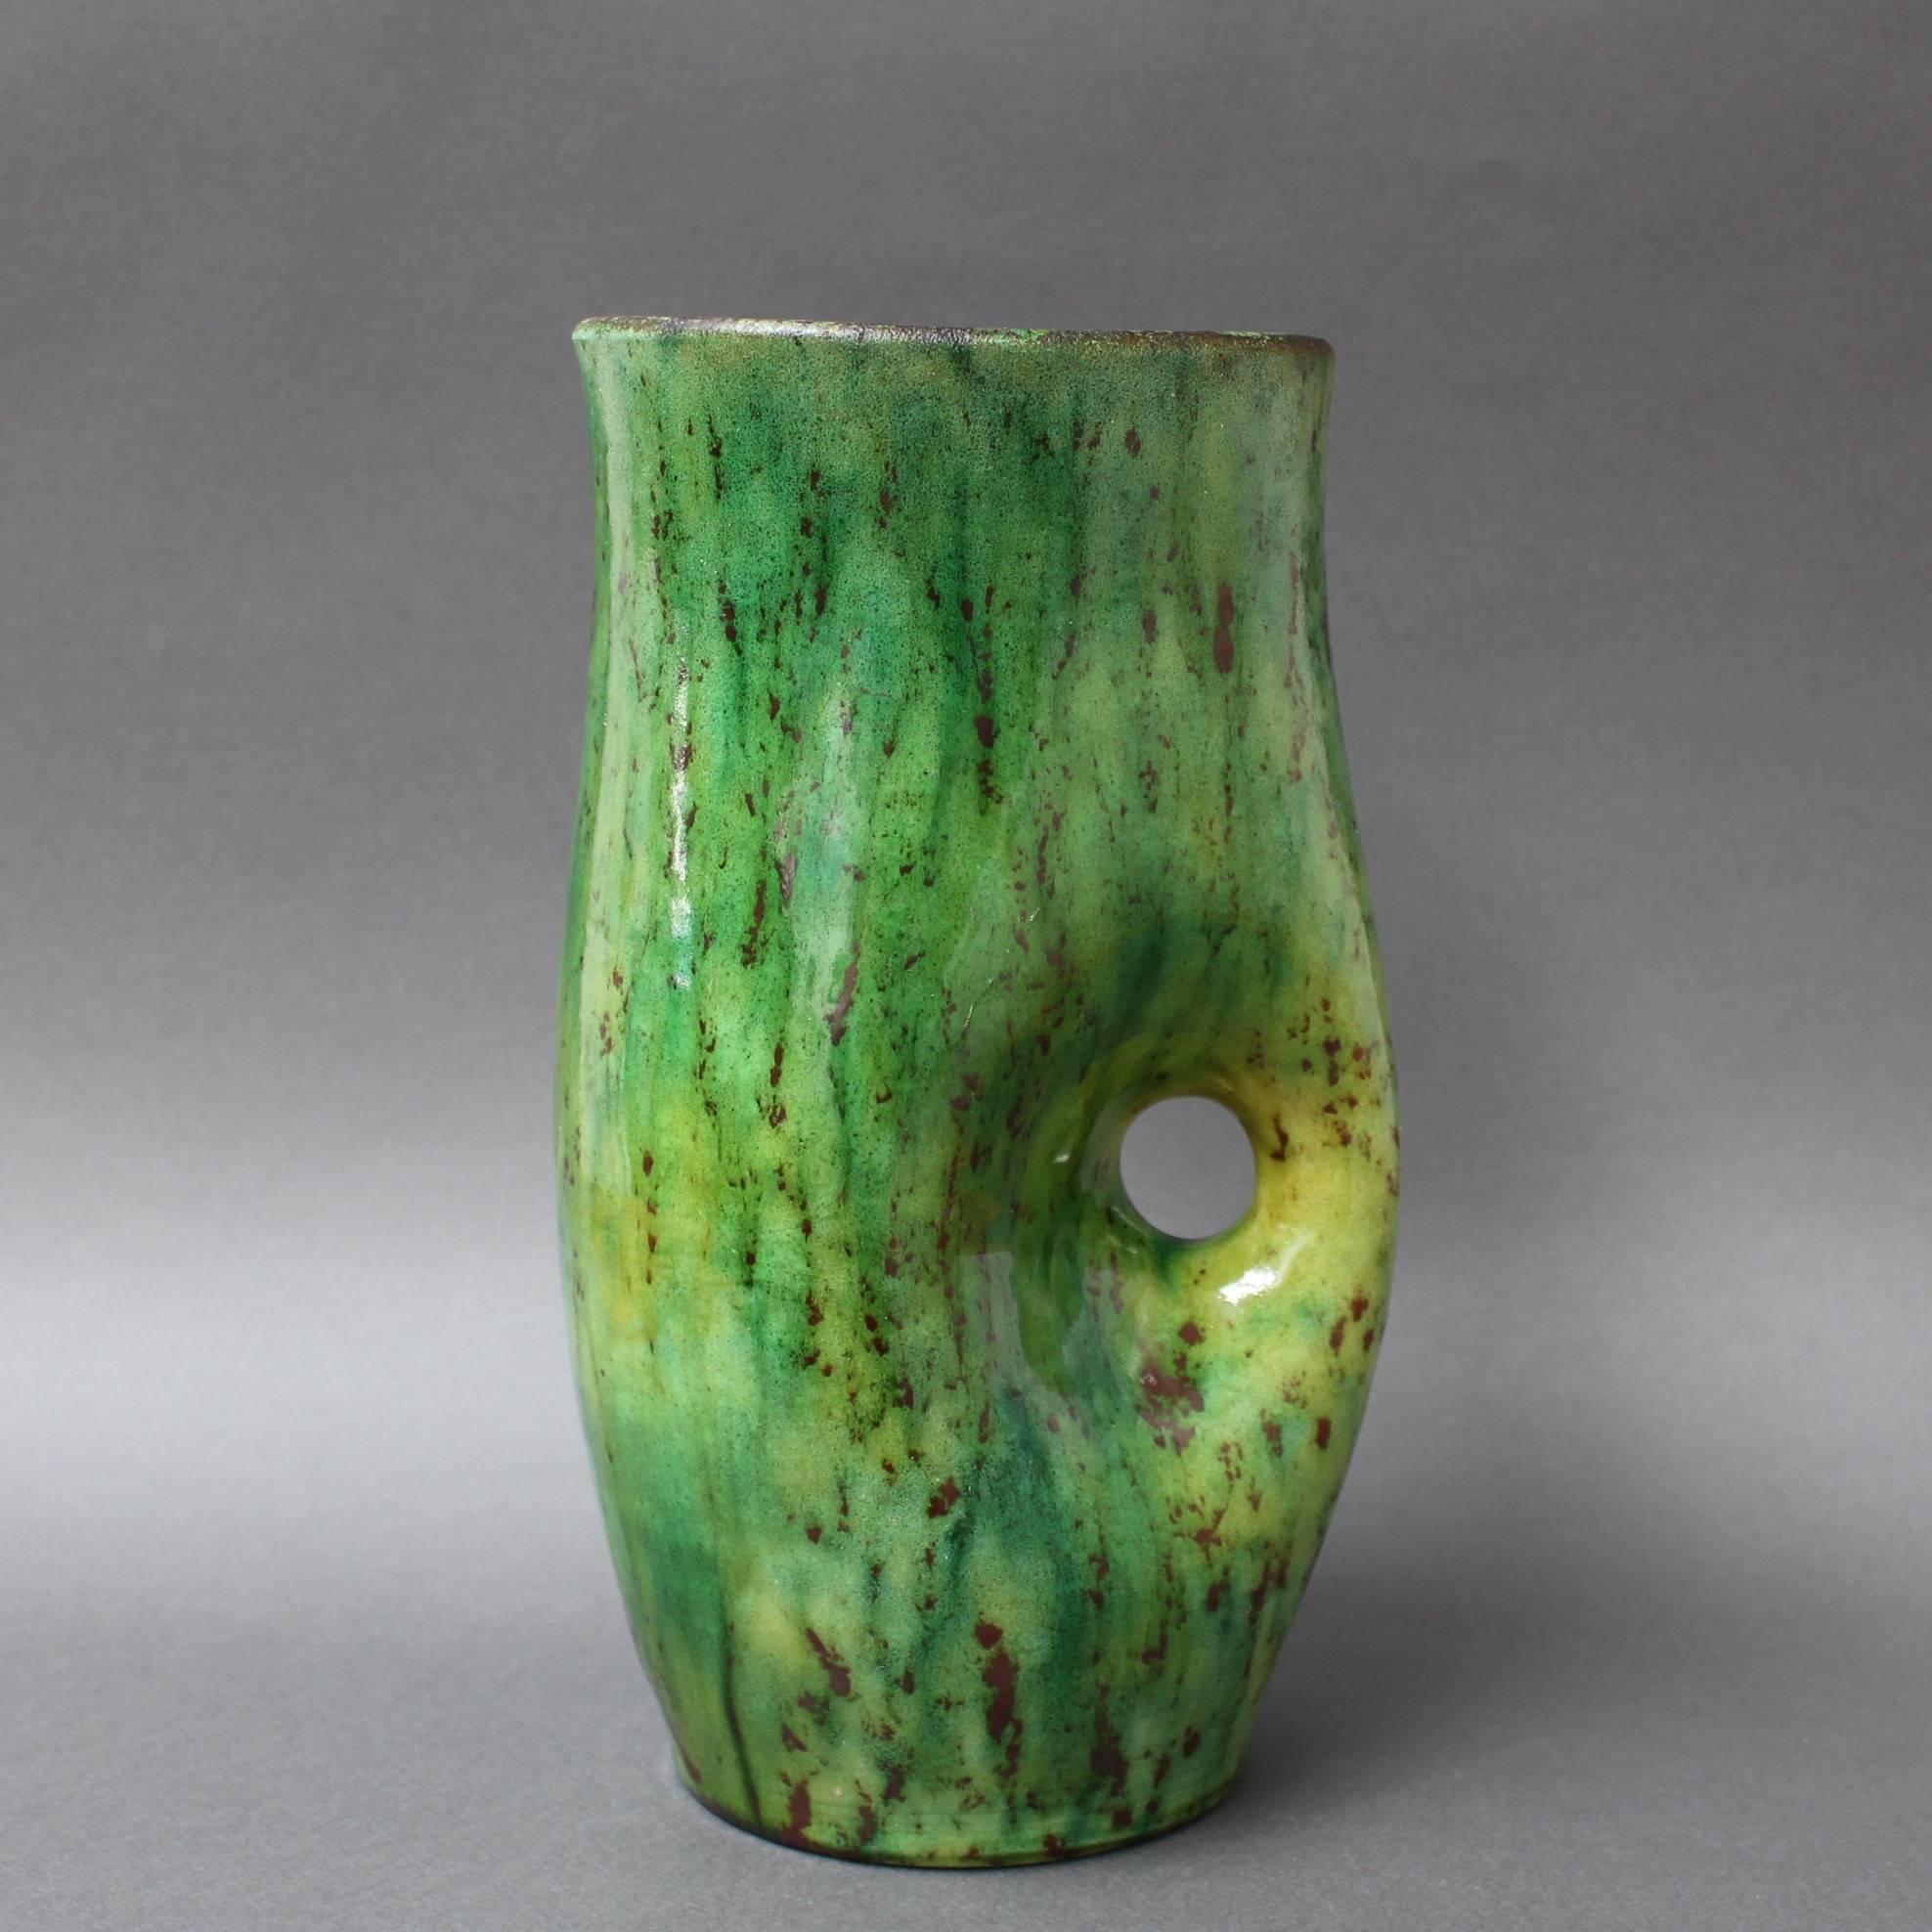 Ceramic vase by Accolay, circa 1960s. A deep jade green combines with a darker flattened drip effect on a curvaceous vase with integrated handle. Beautiful on the eyes and touch - sensuous and tactile. Maker's mark on base - signed 'Accolay' and 'A